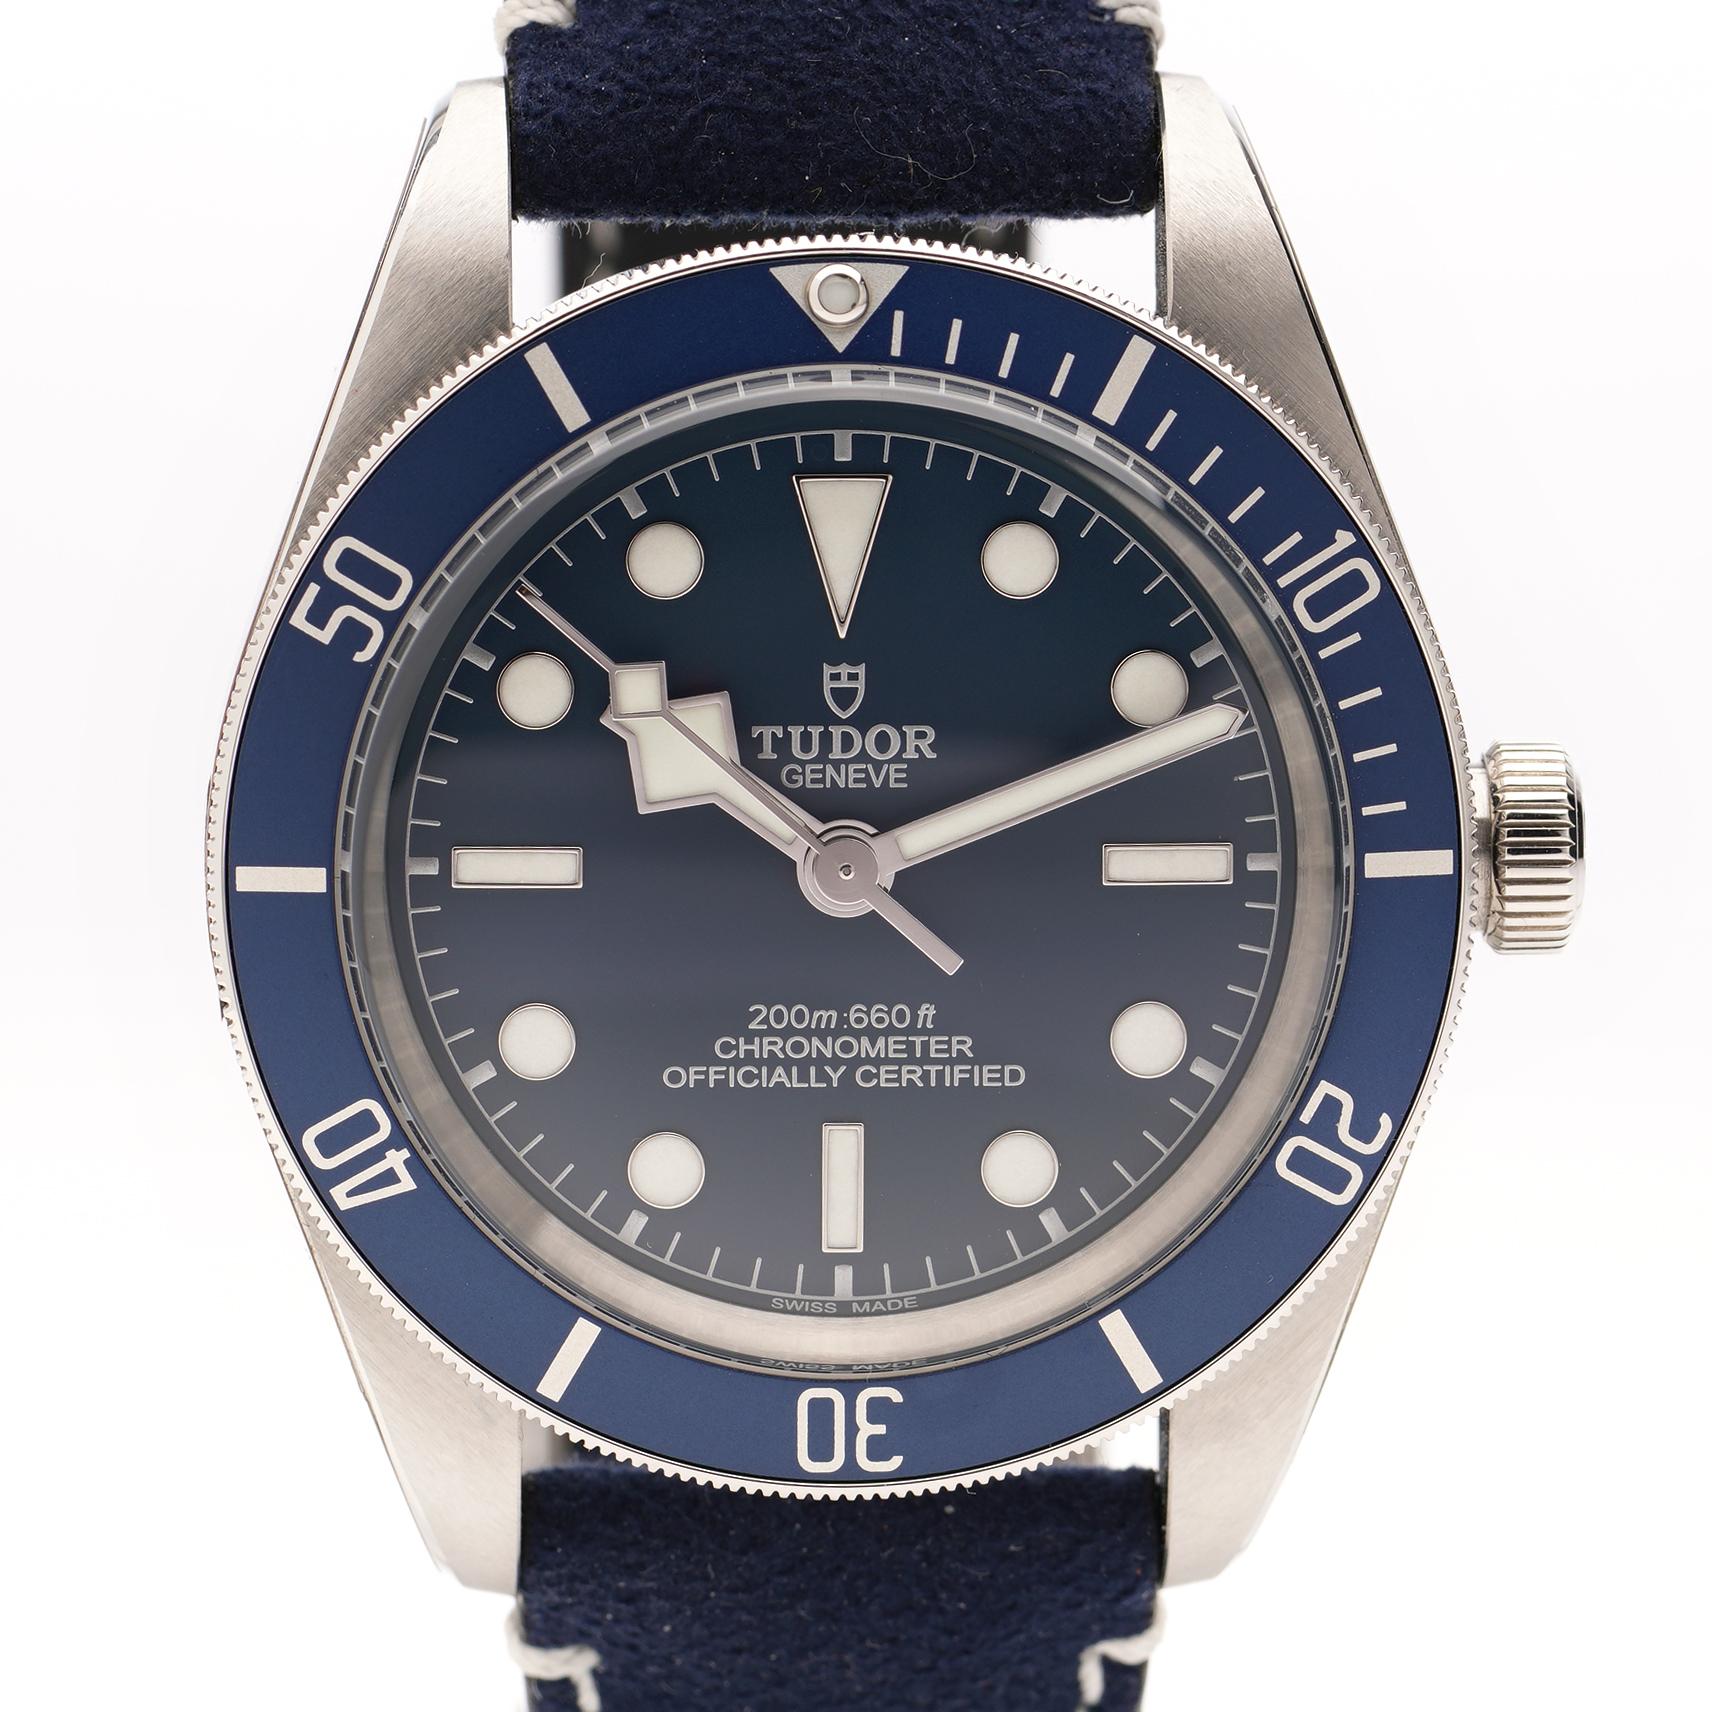 Tudor Black Bay Fifty-Eight Navy Blue M79030B-0002

Tudor, which has become one of the epic rebirth stories of the watch industry with its Heritage Black Bay model as well as its successful management that set the standard in the industry,